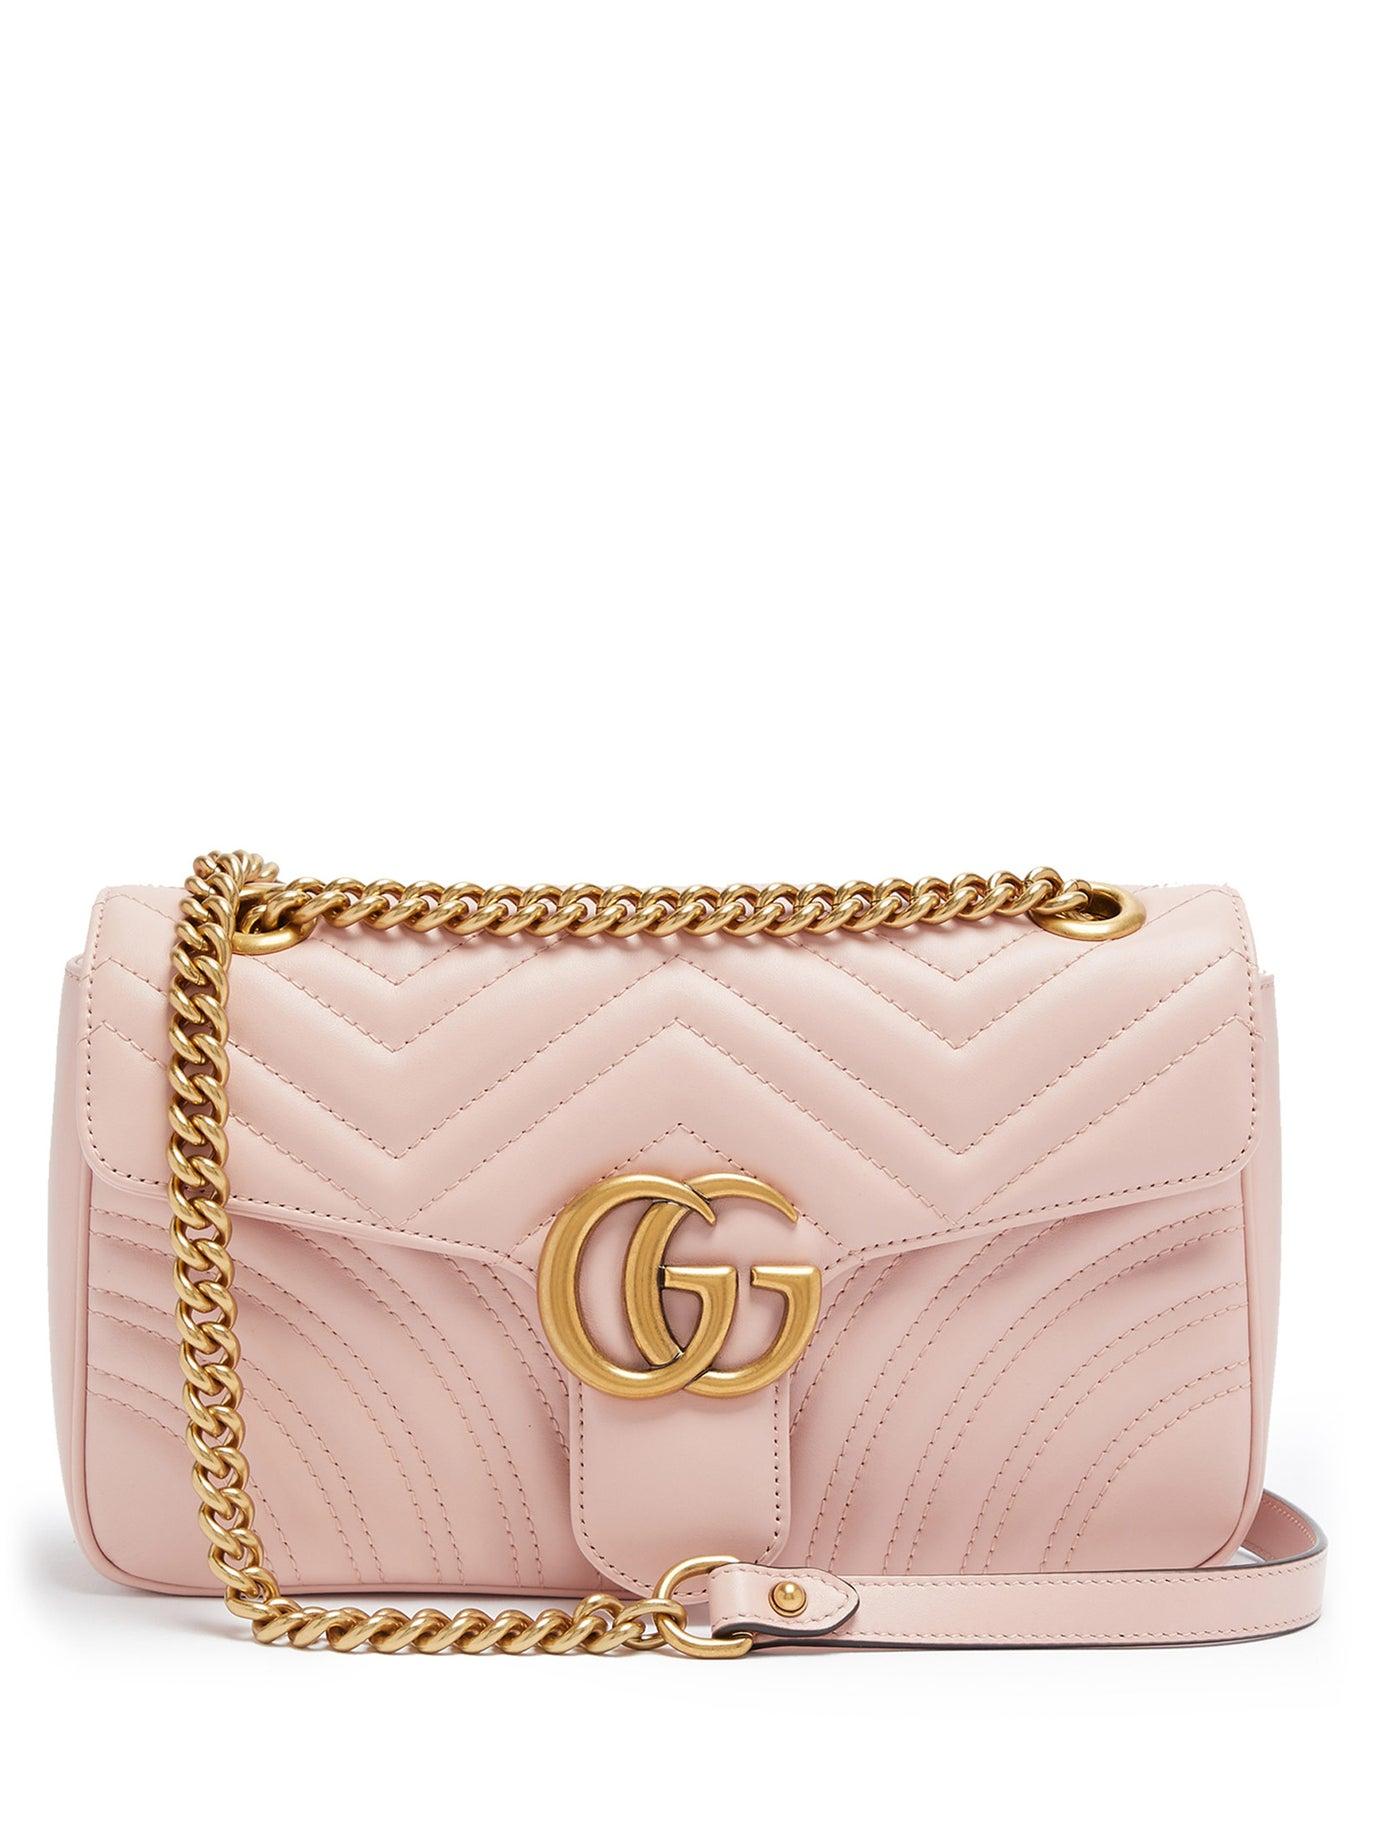 Gucci Quilted Leather Small Shoulder Bag Review | Paul Smith